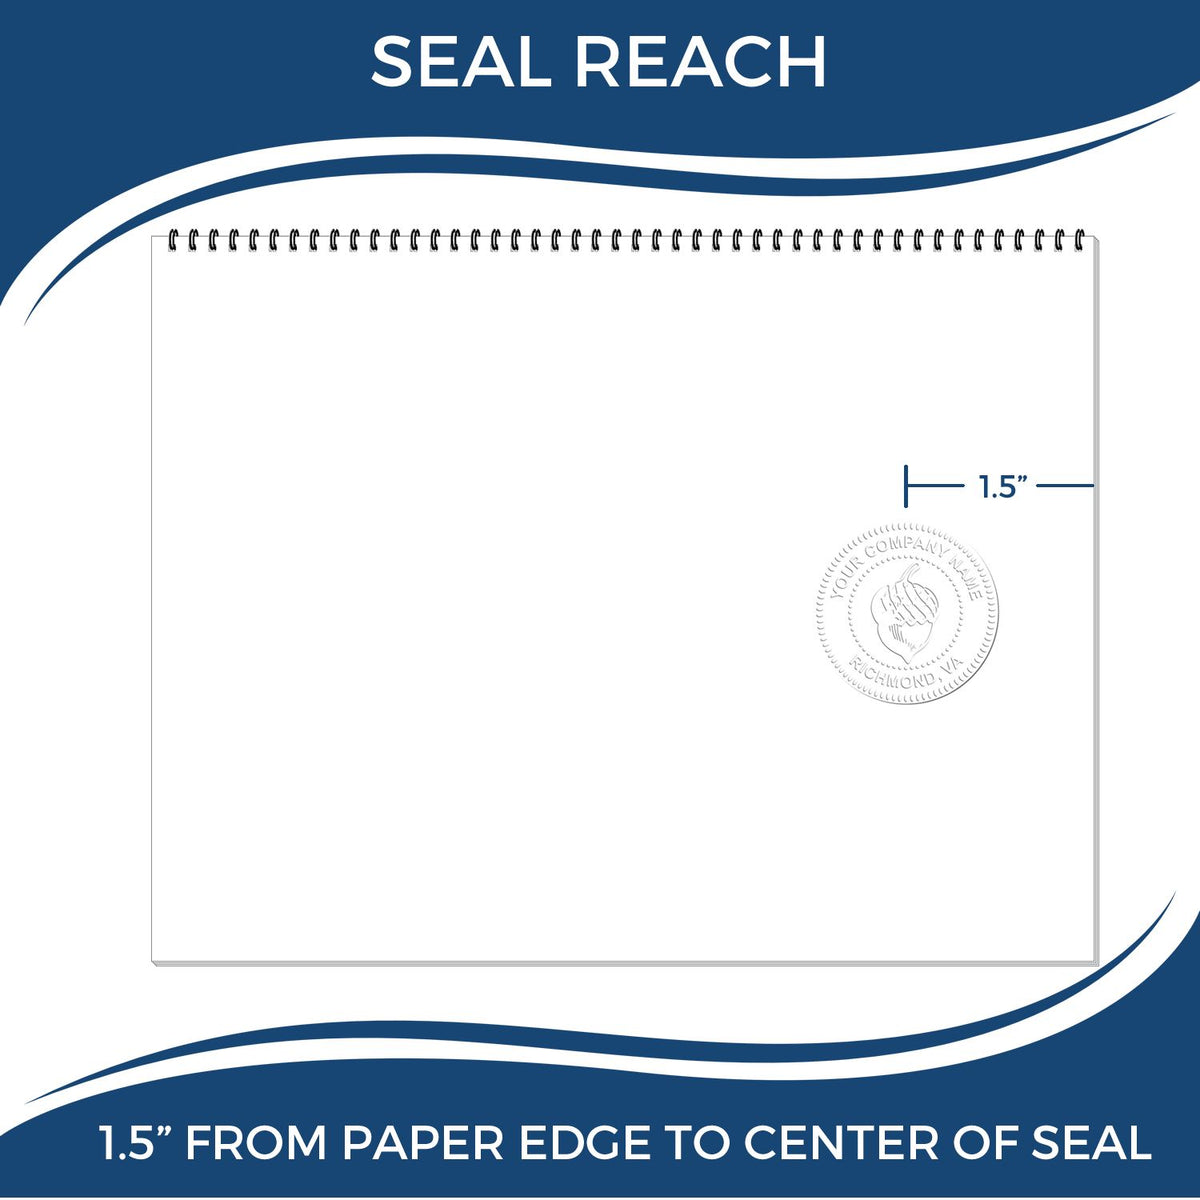 An infographic showing the seal reach which is represented by a ruler and a miniature seal image of the Handheld Wyoming Professional Geologist Embosser